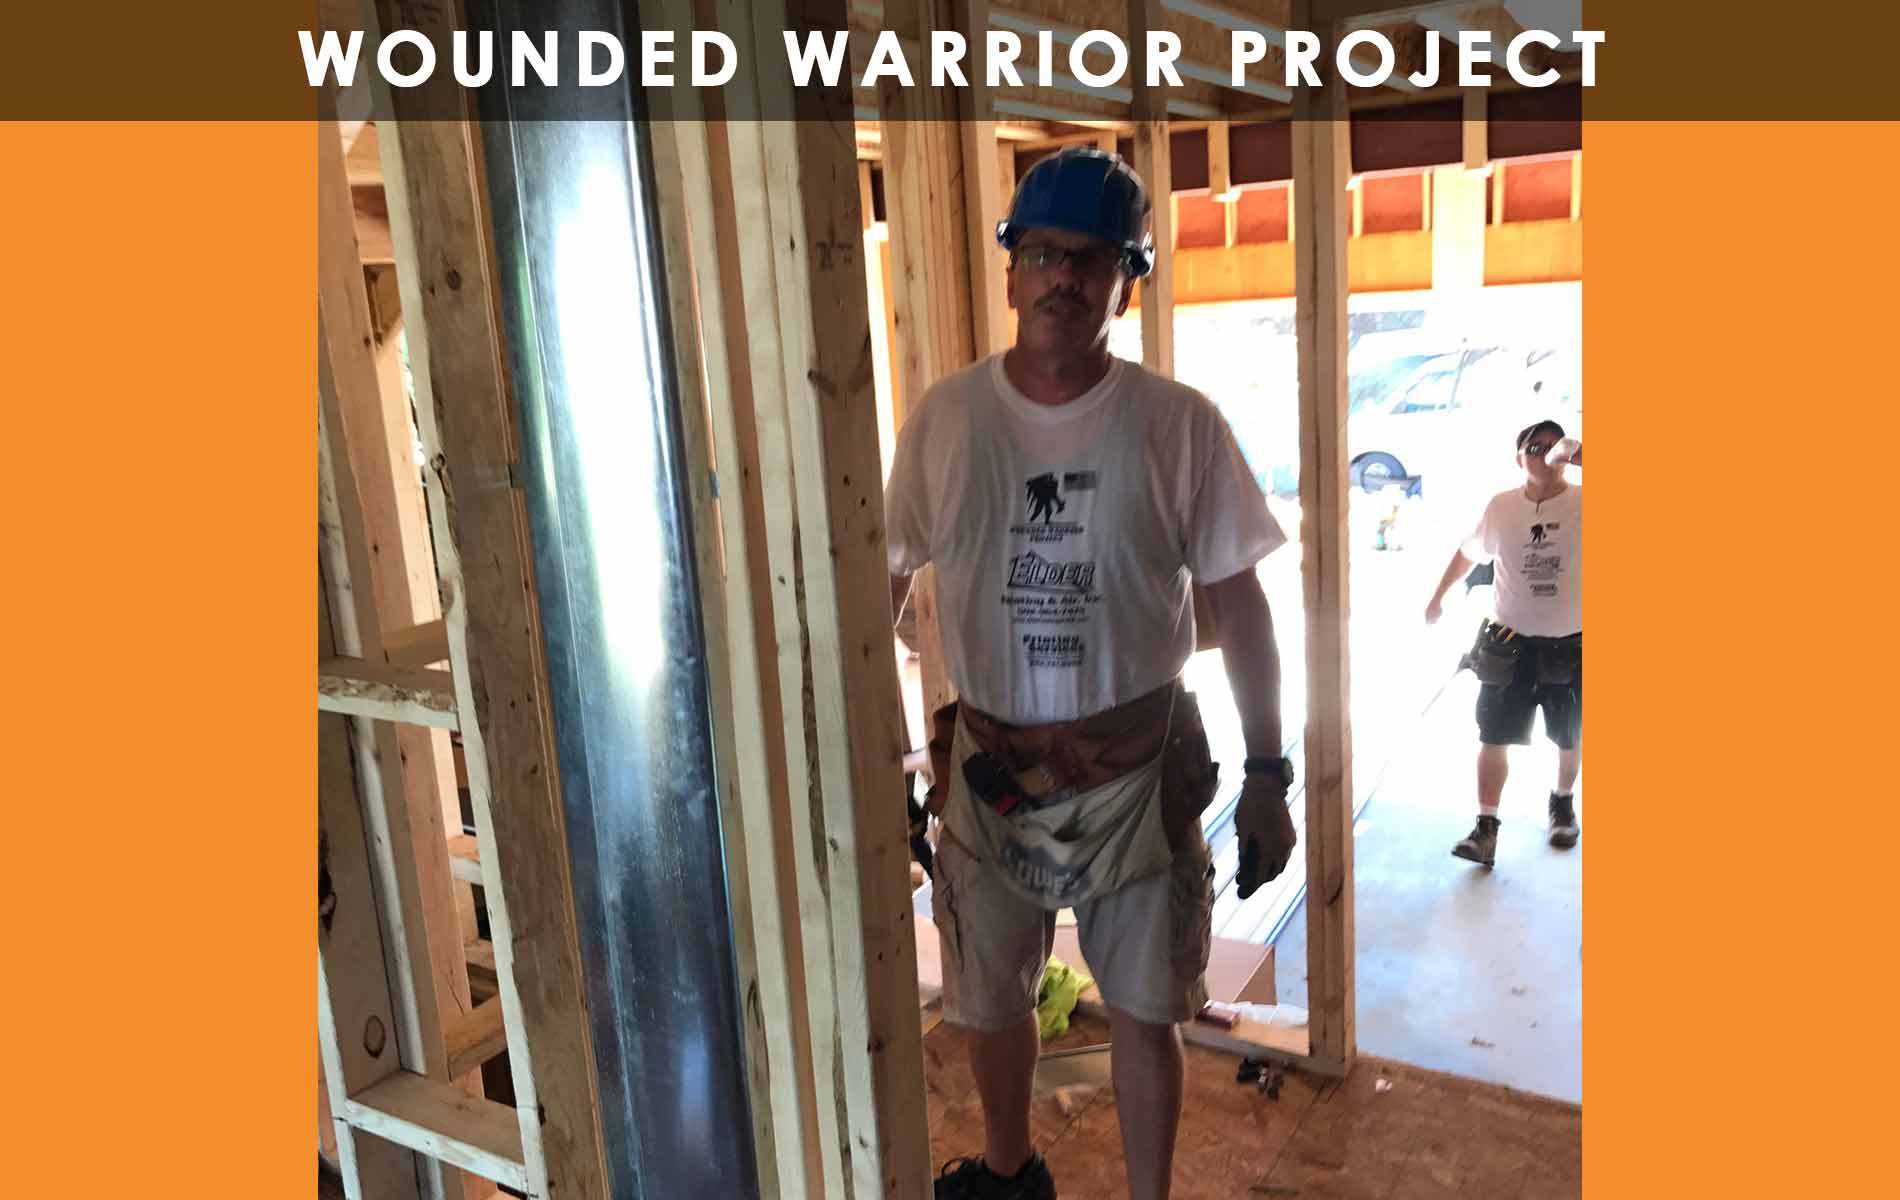 WoundedWarriorProject